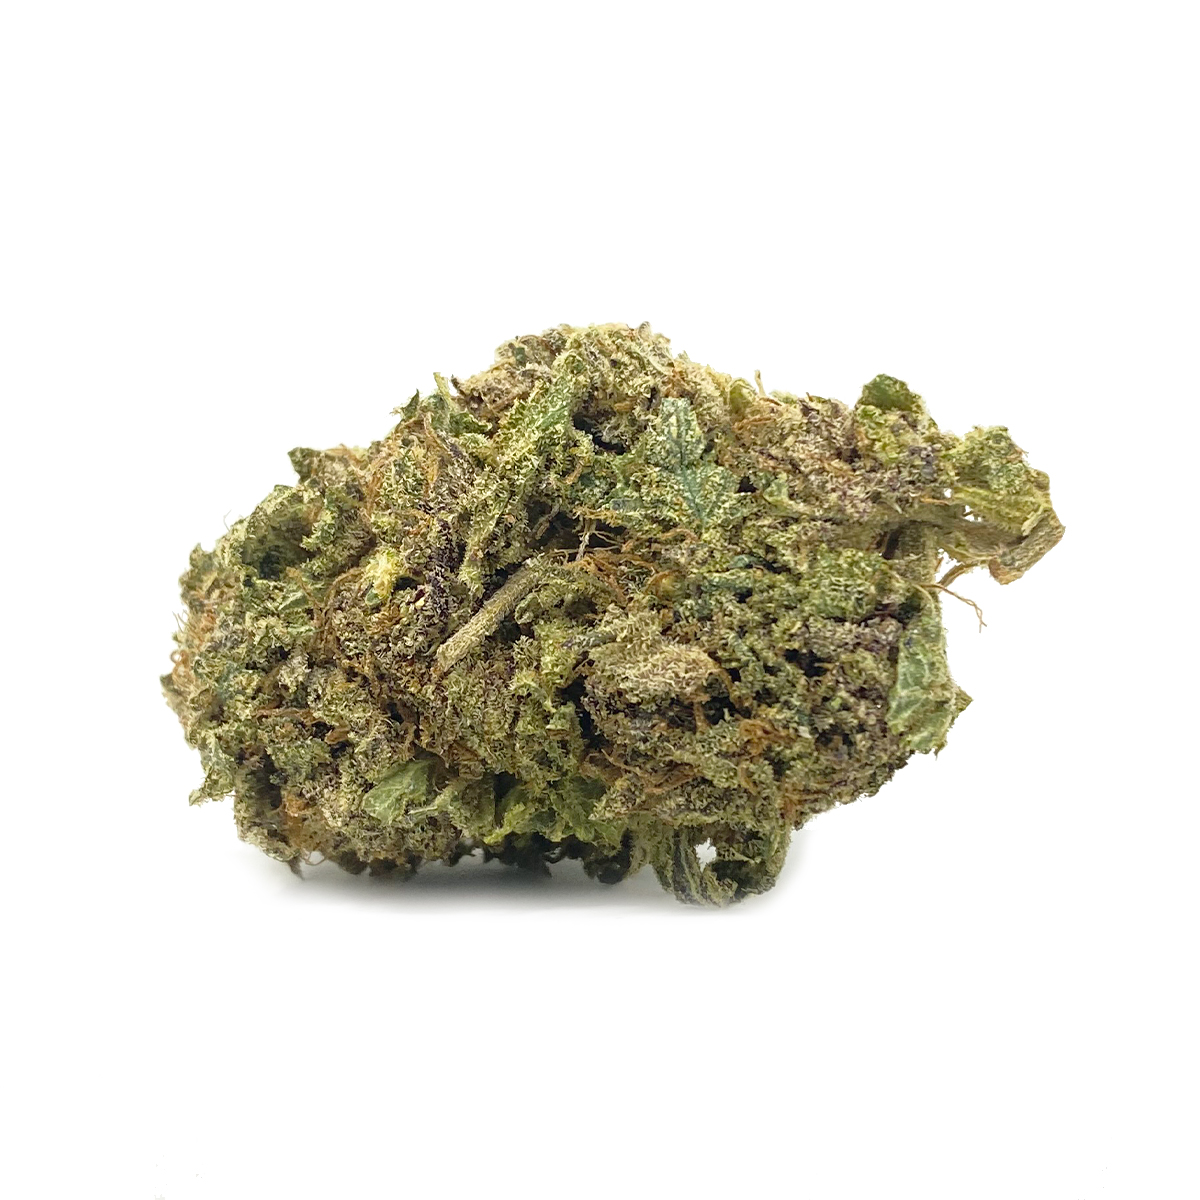 Budget Buds Purple Champagne| Buy Weed Online | Dispensary Near Me